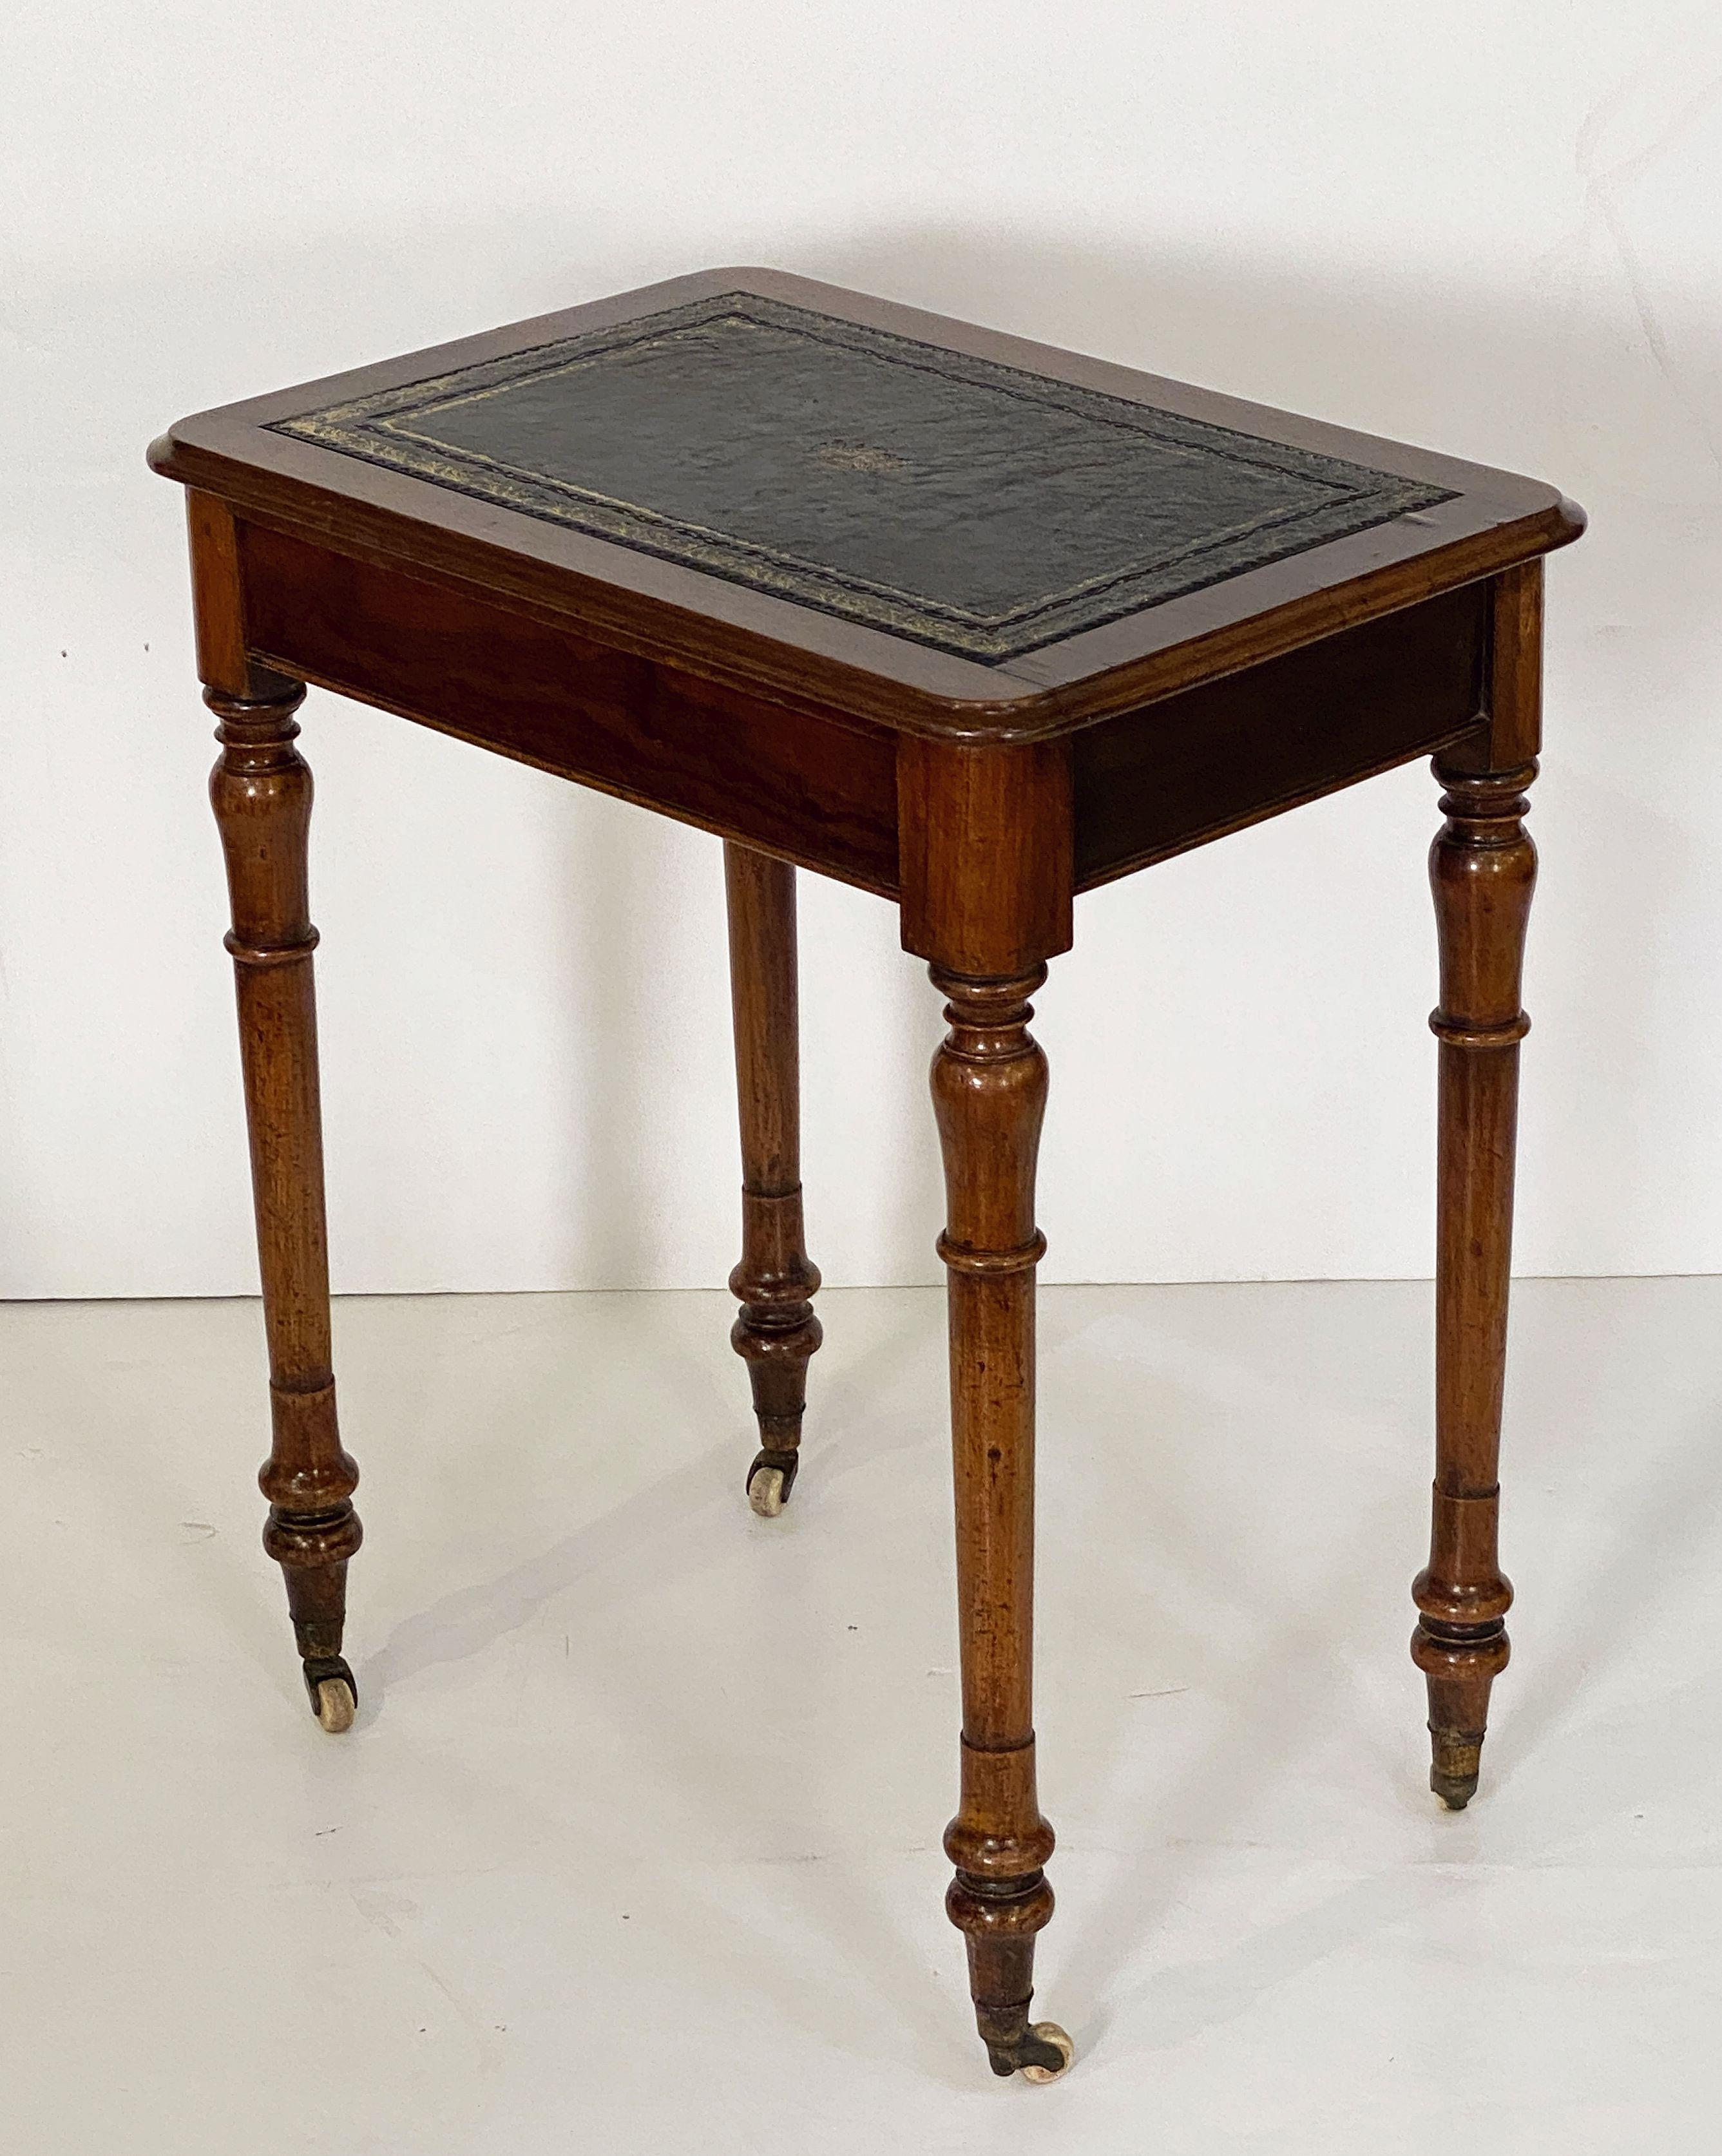 Embossed English Writing Table or Desk of Mahogany with Leather Top